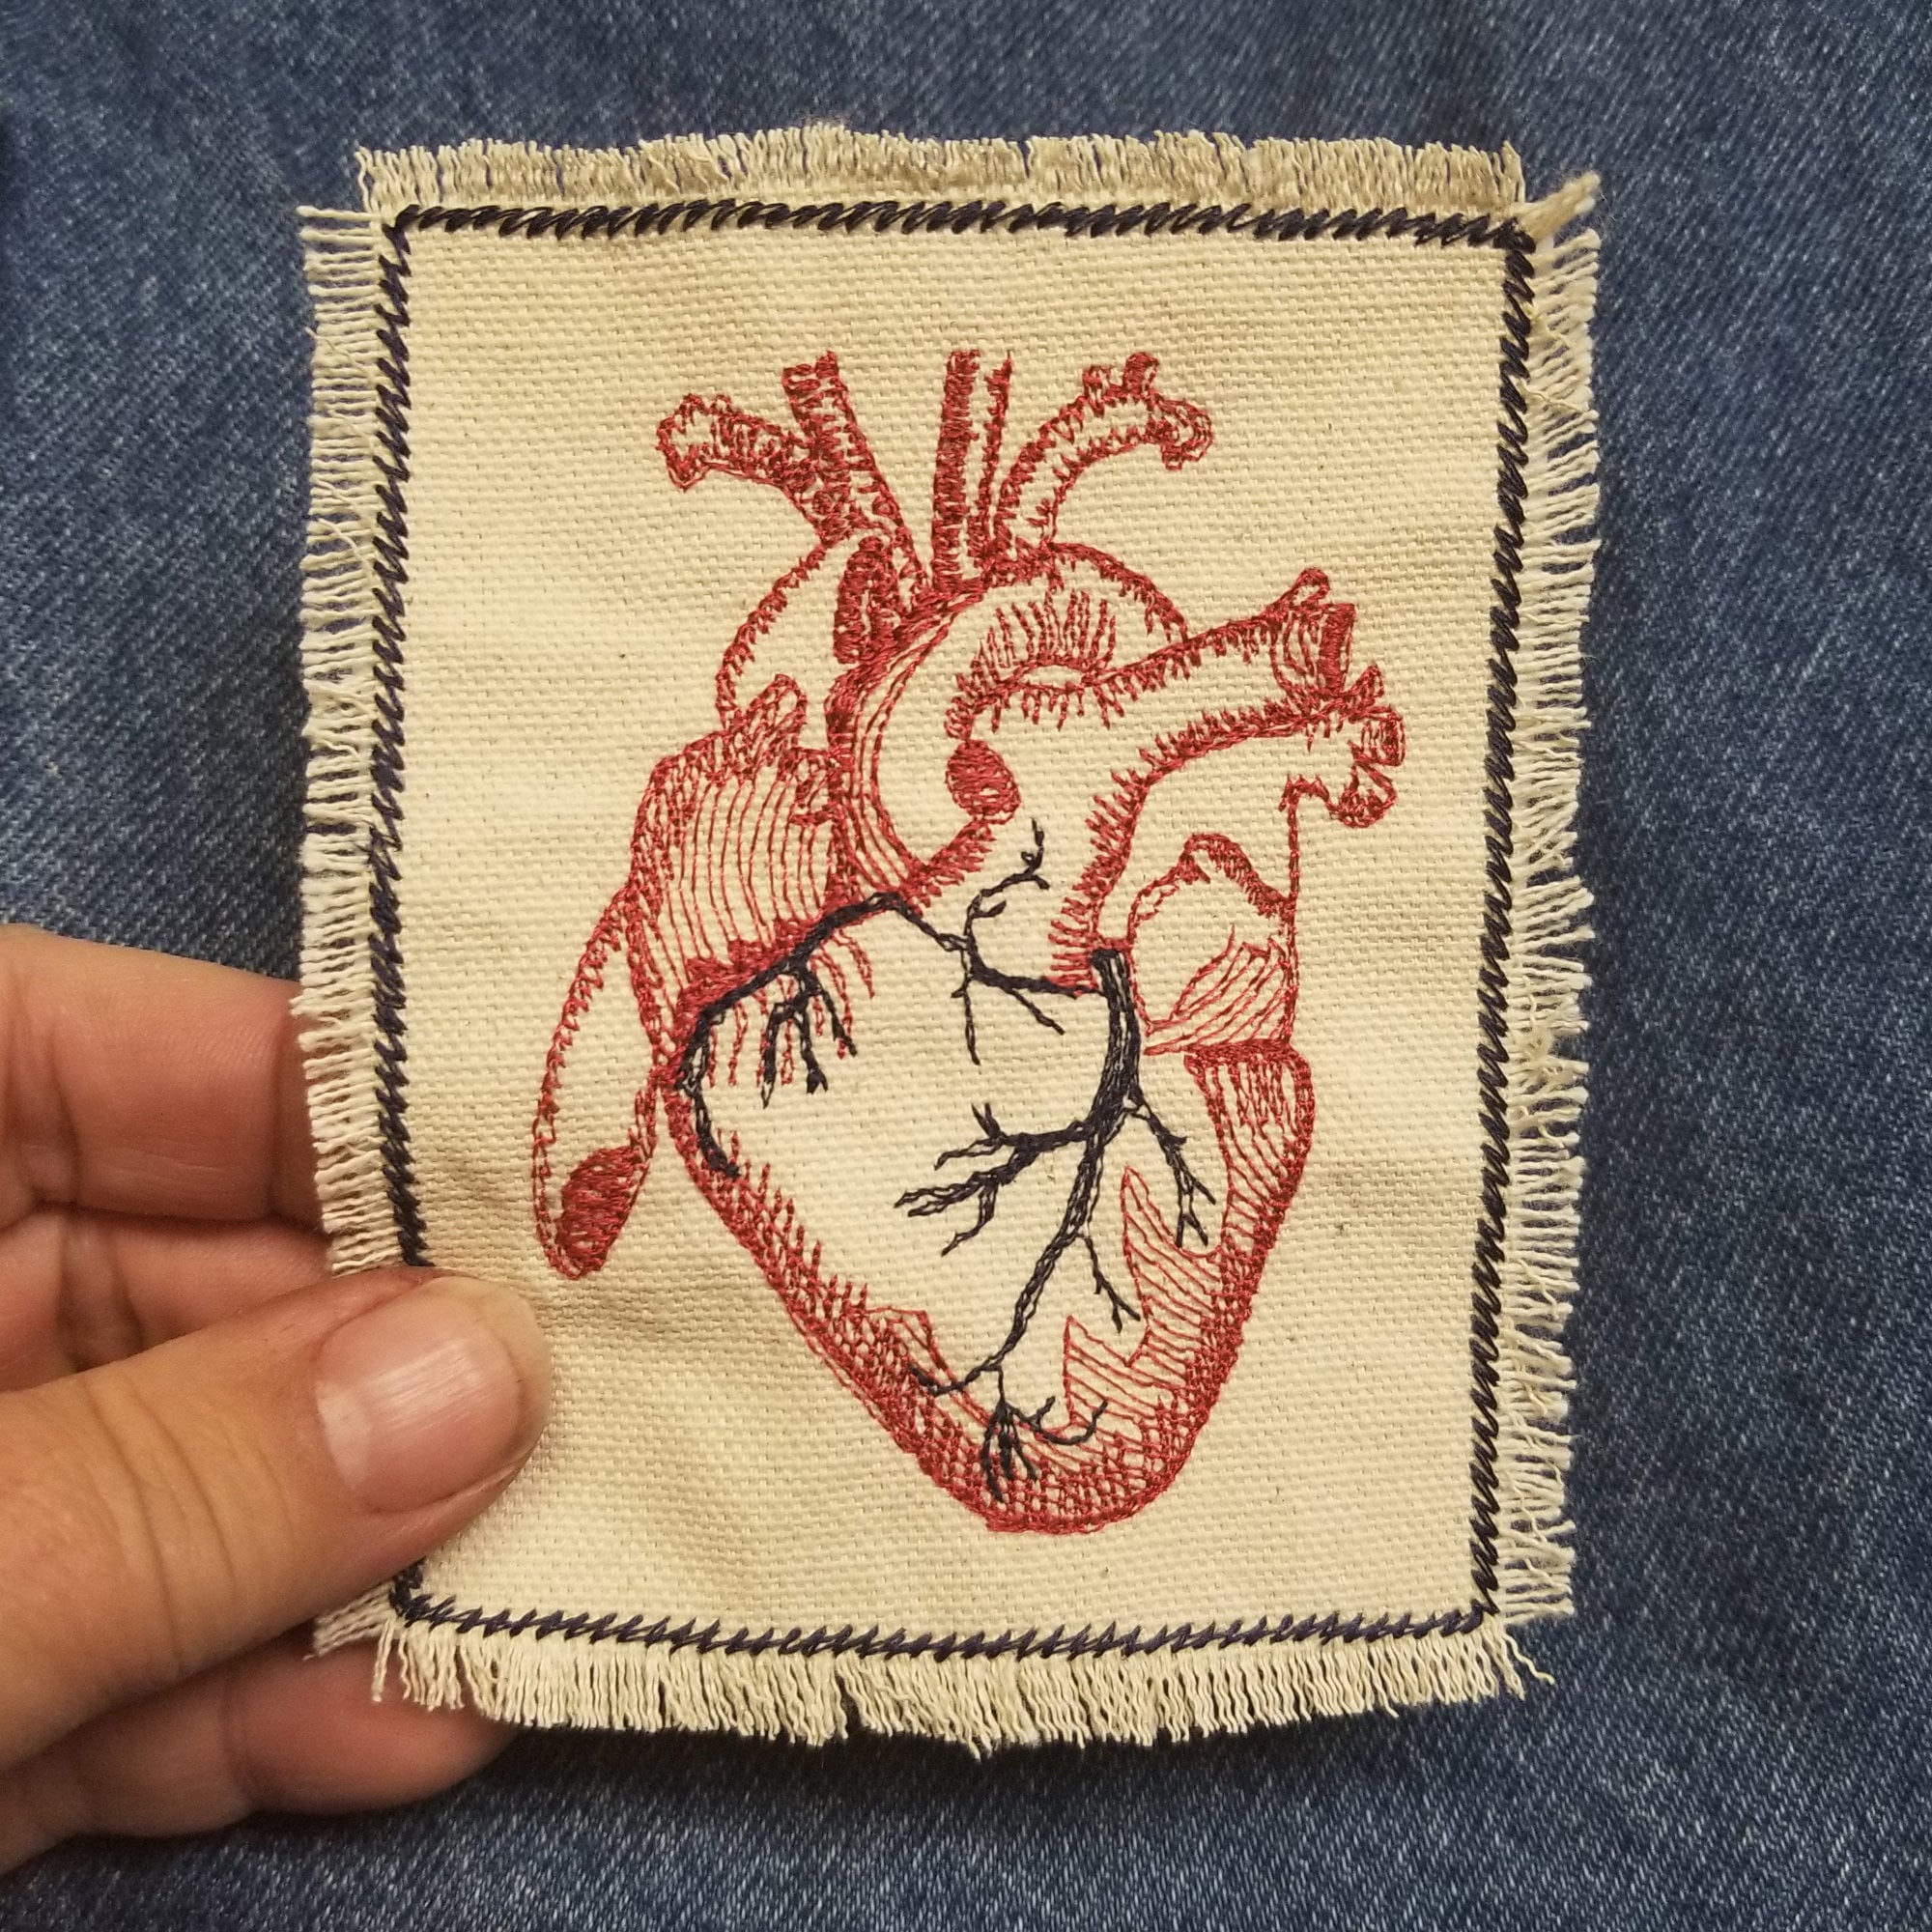 Anatomy Heart Iron on Patch, 3.5 Inch Heart,patch Heart,embroidery  Patch,sew on Patch, Funky Patch,cool Patches,hippy X-ray 